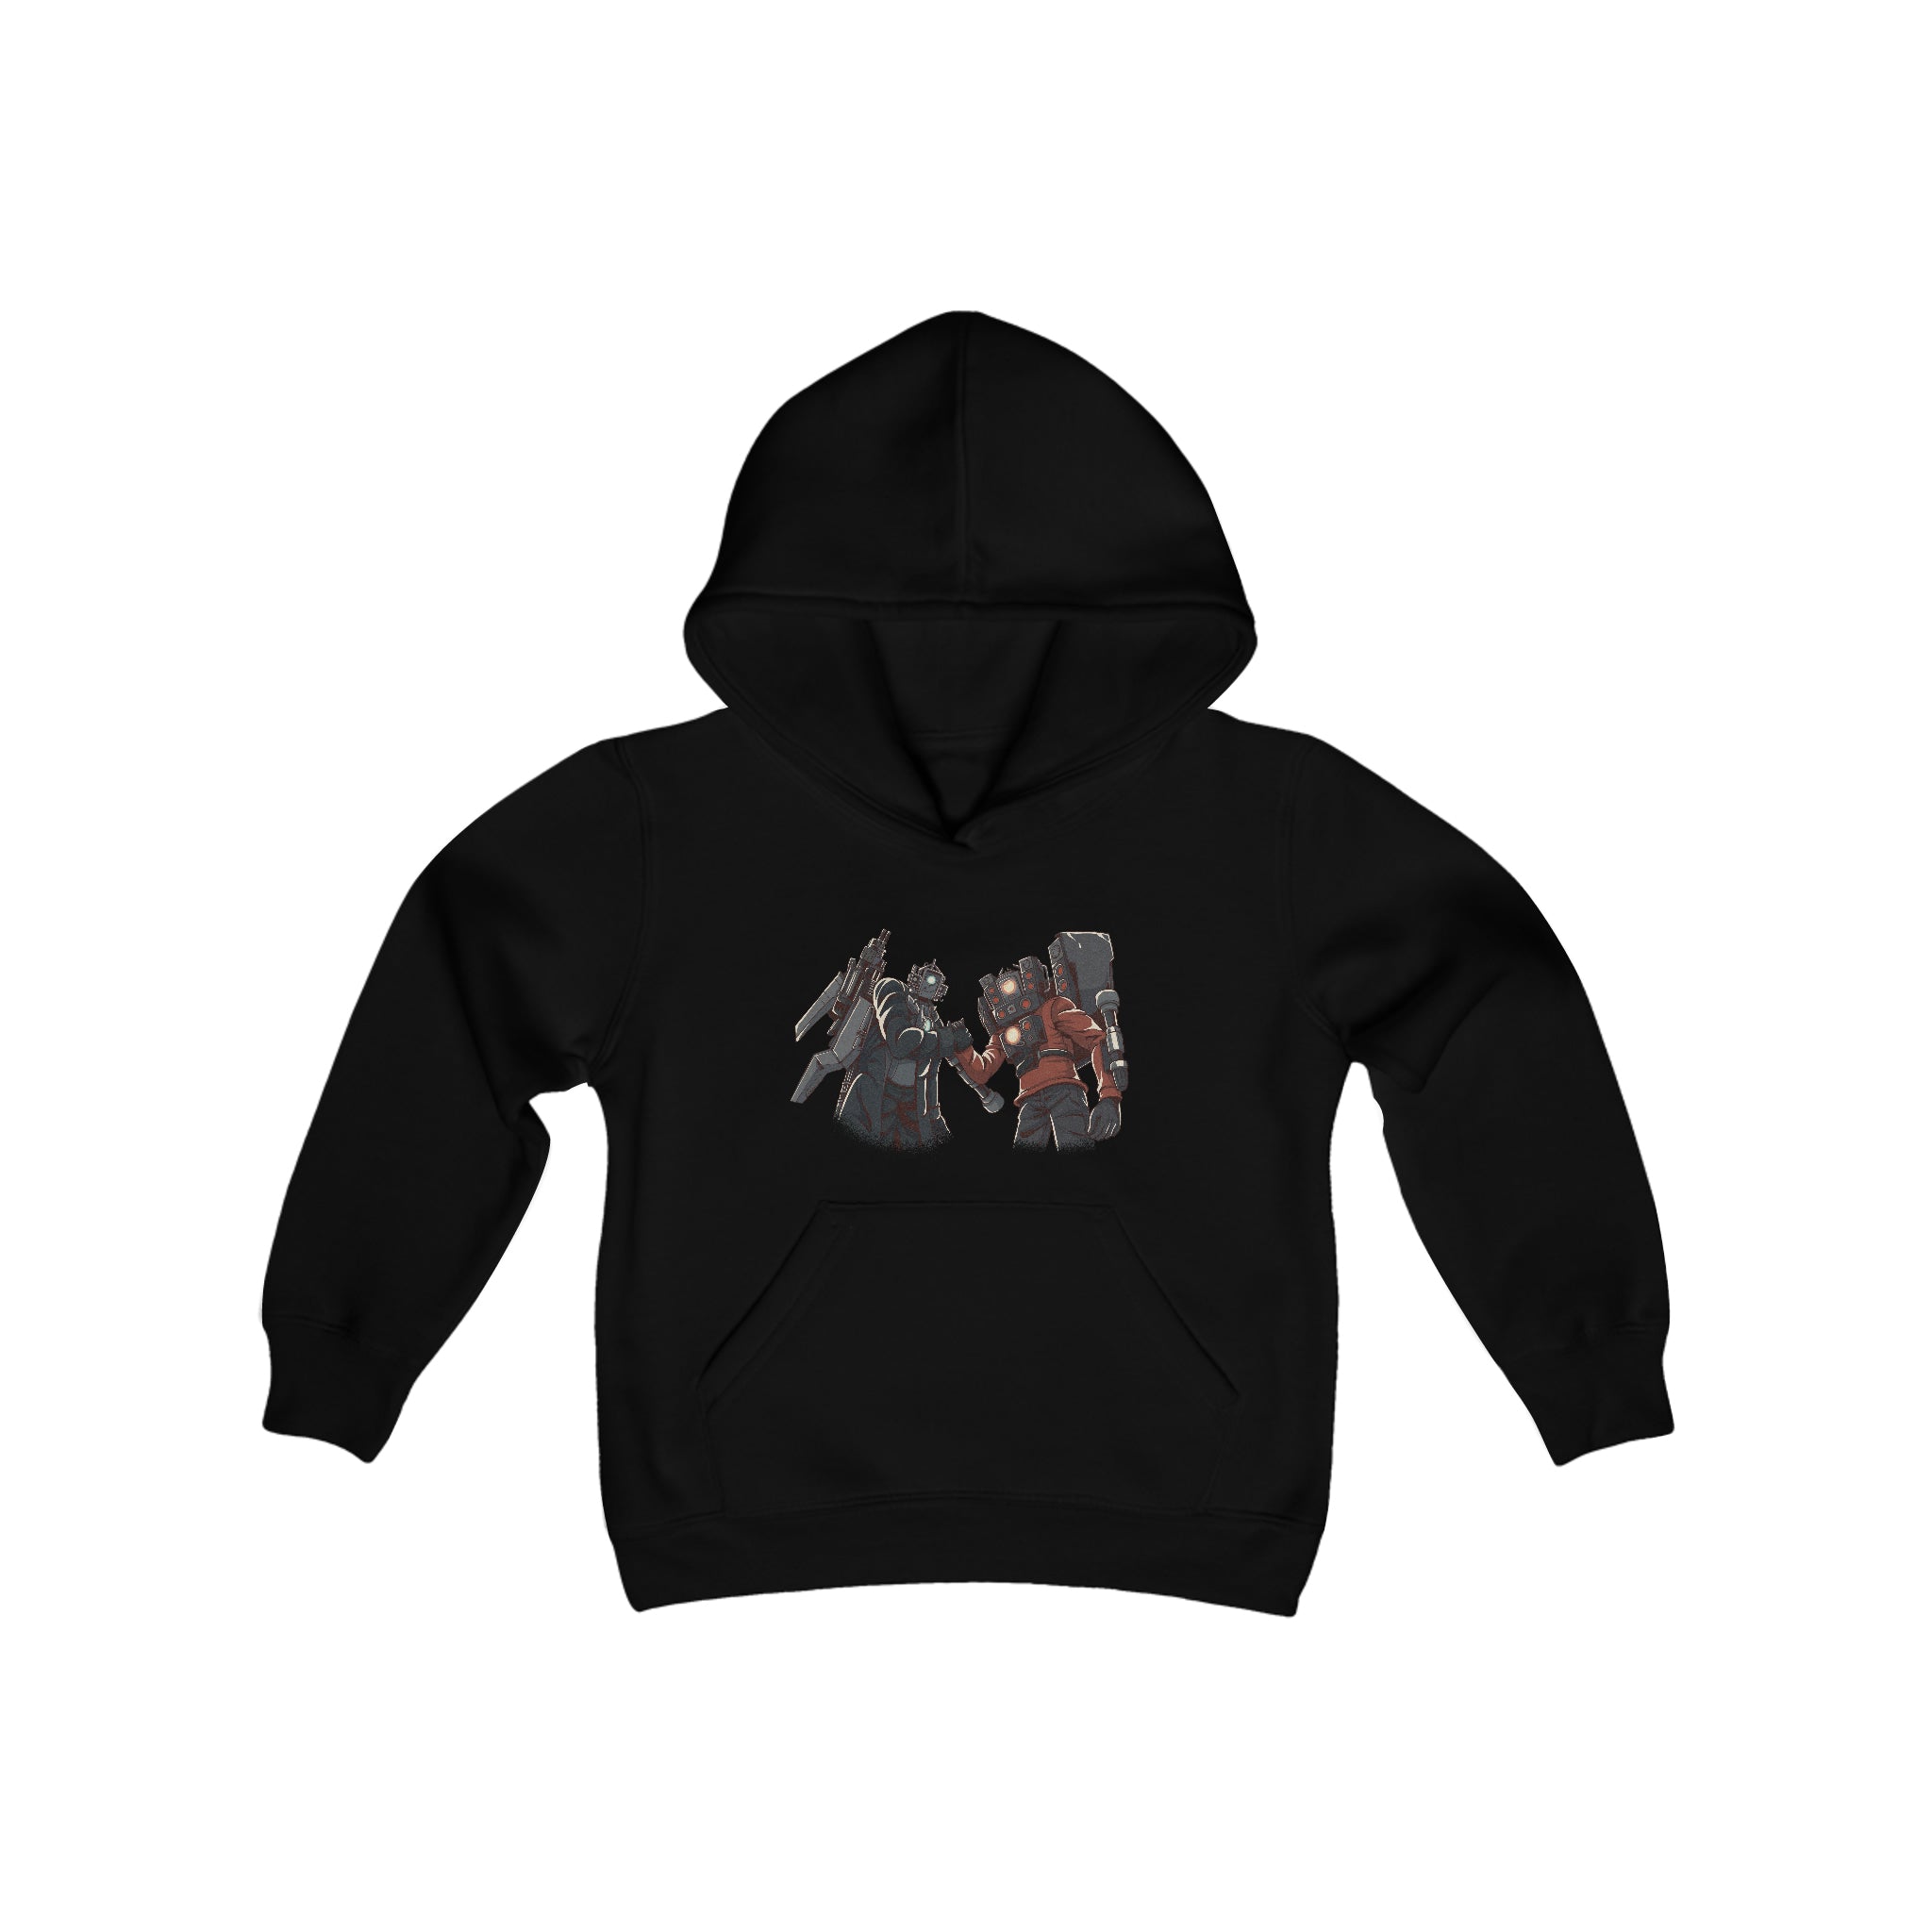 Best Pals Hoodie - Youth